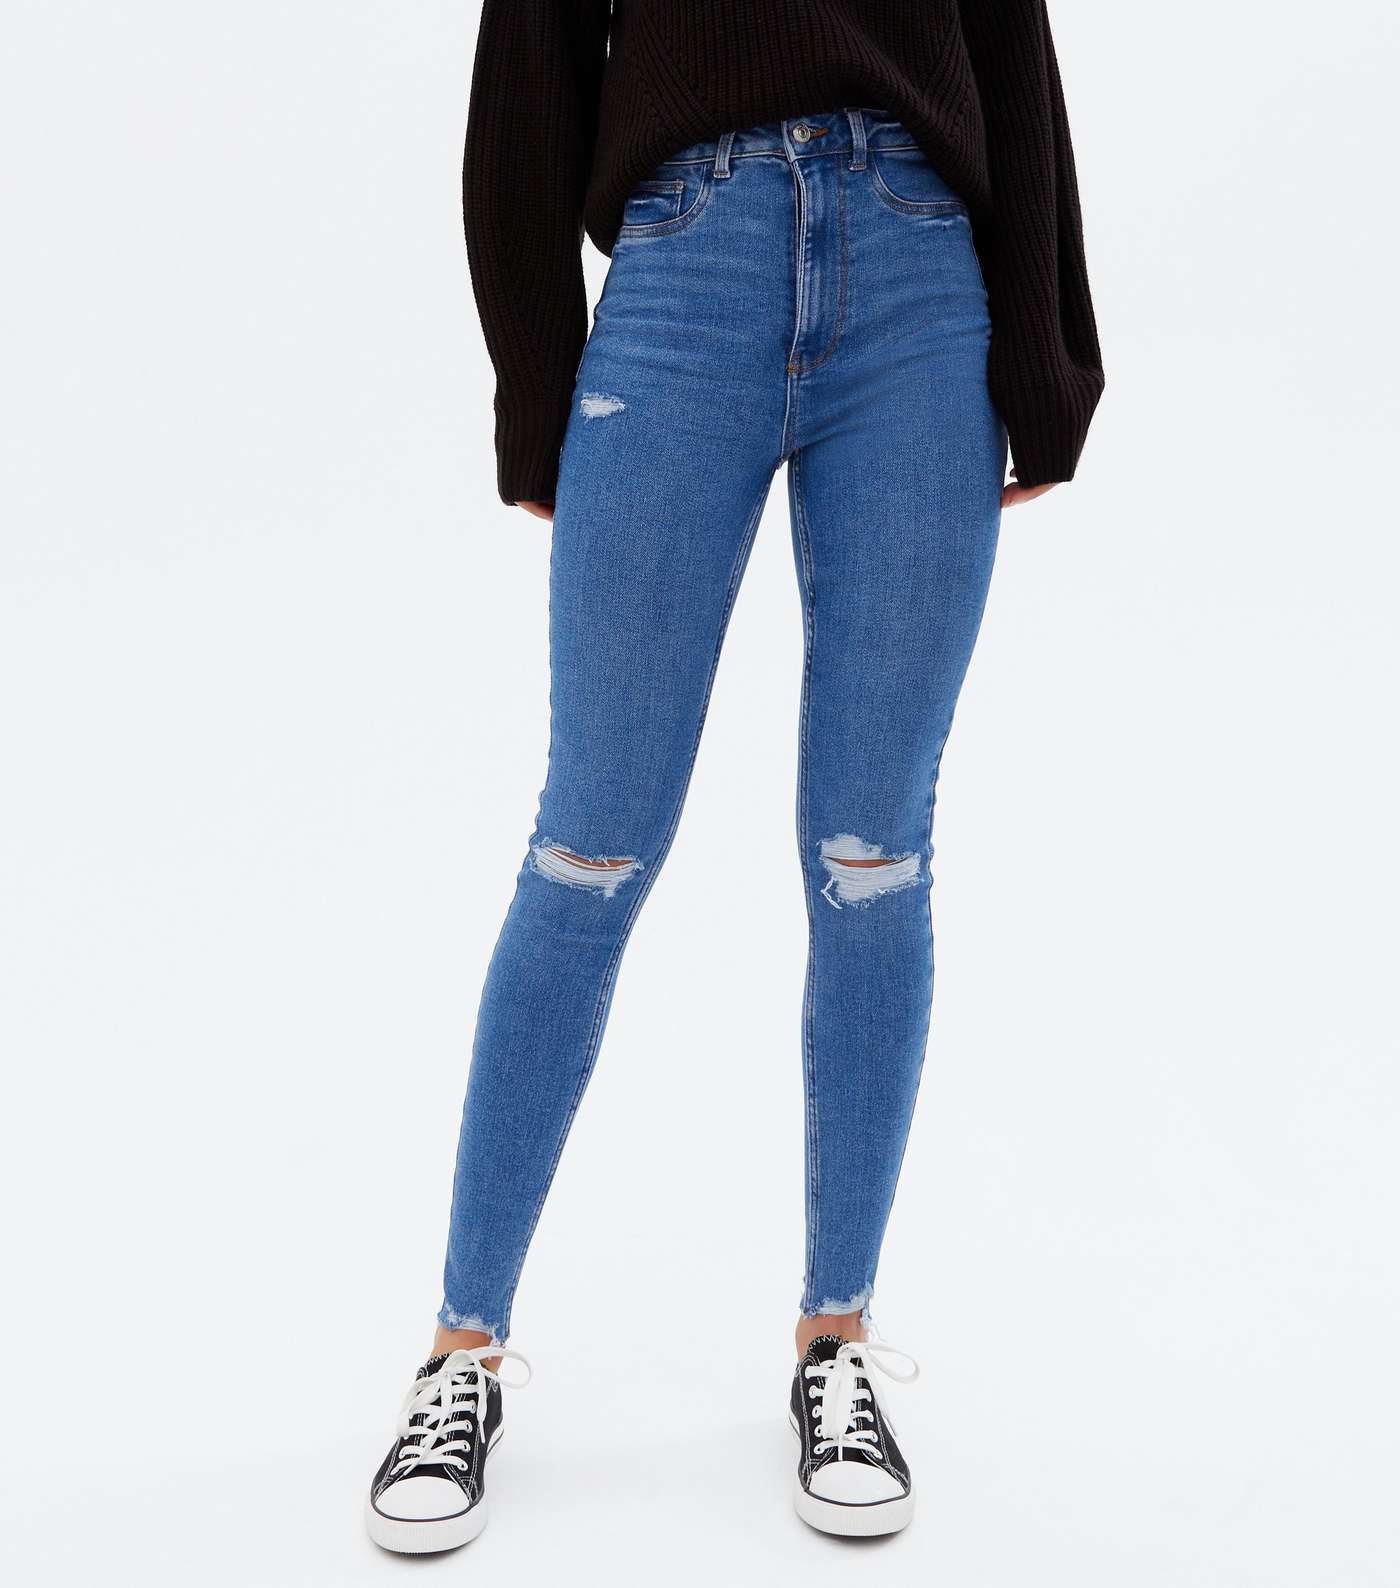 Tall Bright Blue Ripped High Waist Hallie Super Skinny Jeans Image 2